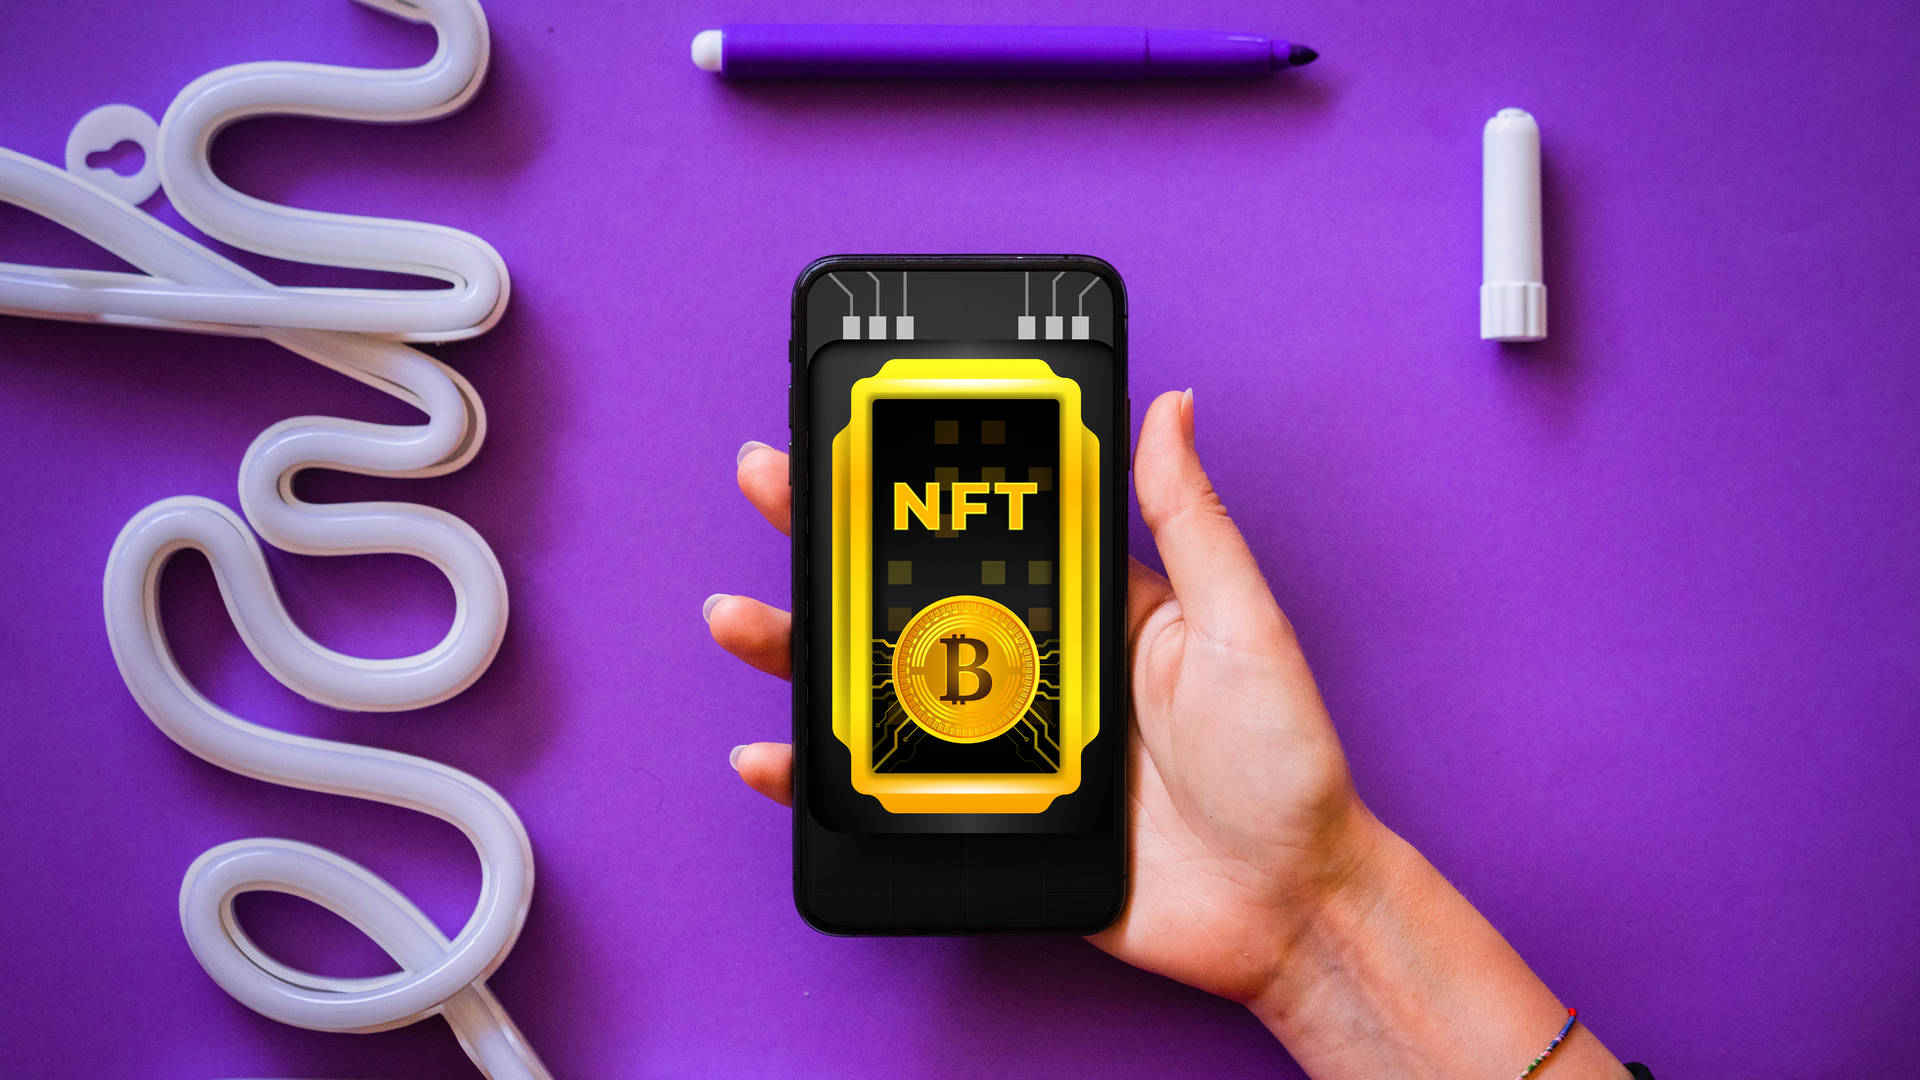 Nft Bitcoin On Phone Background